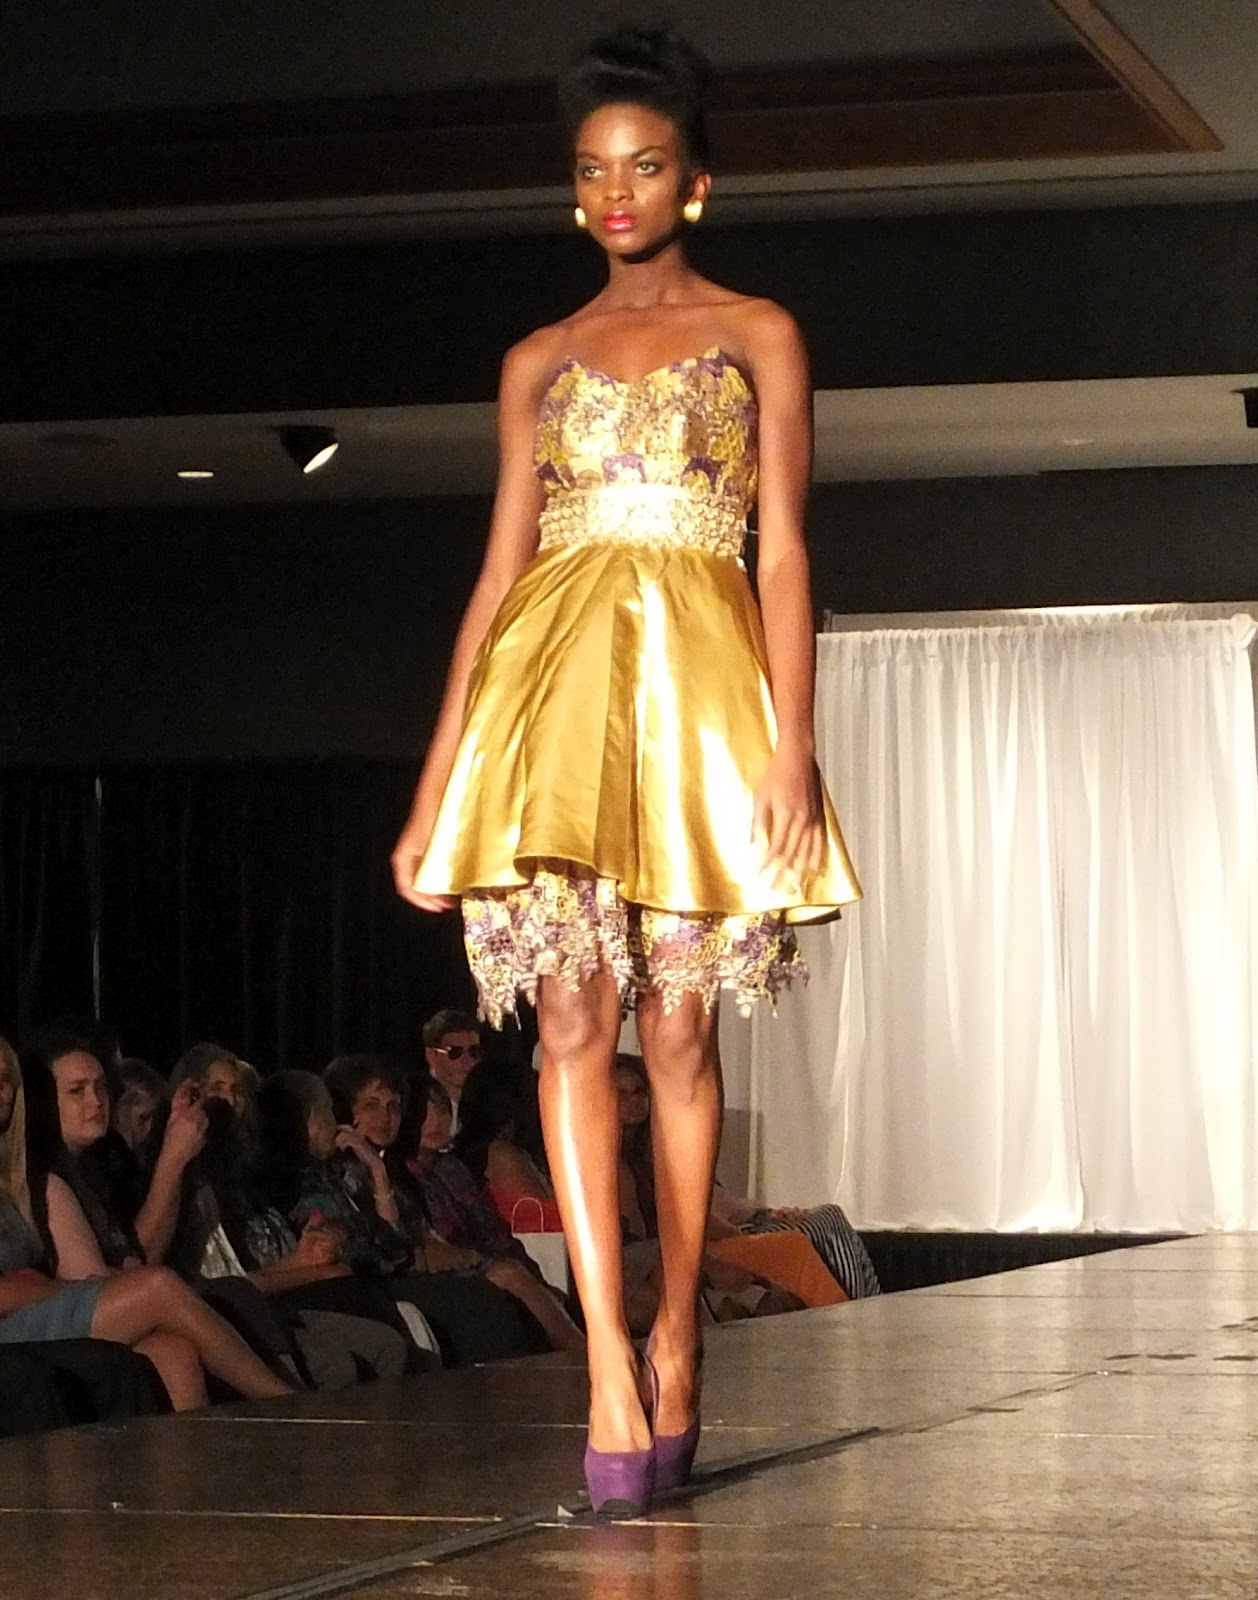 This gold dress with purple shoes was easily one of my favorites.